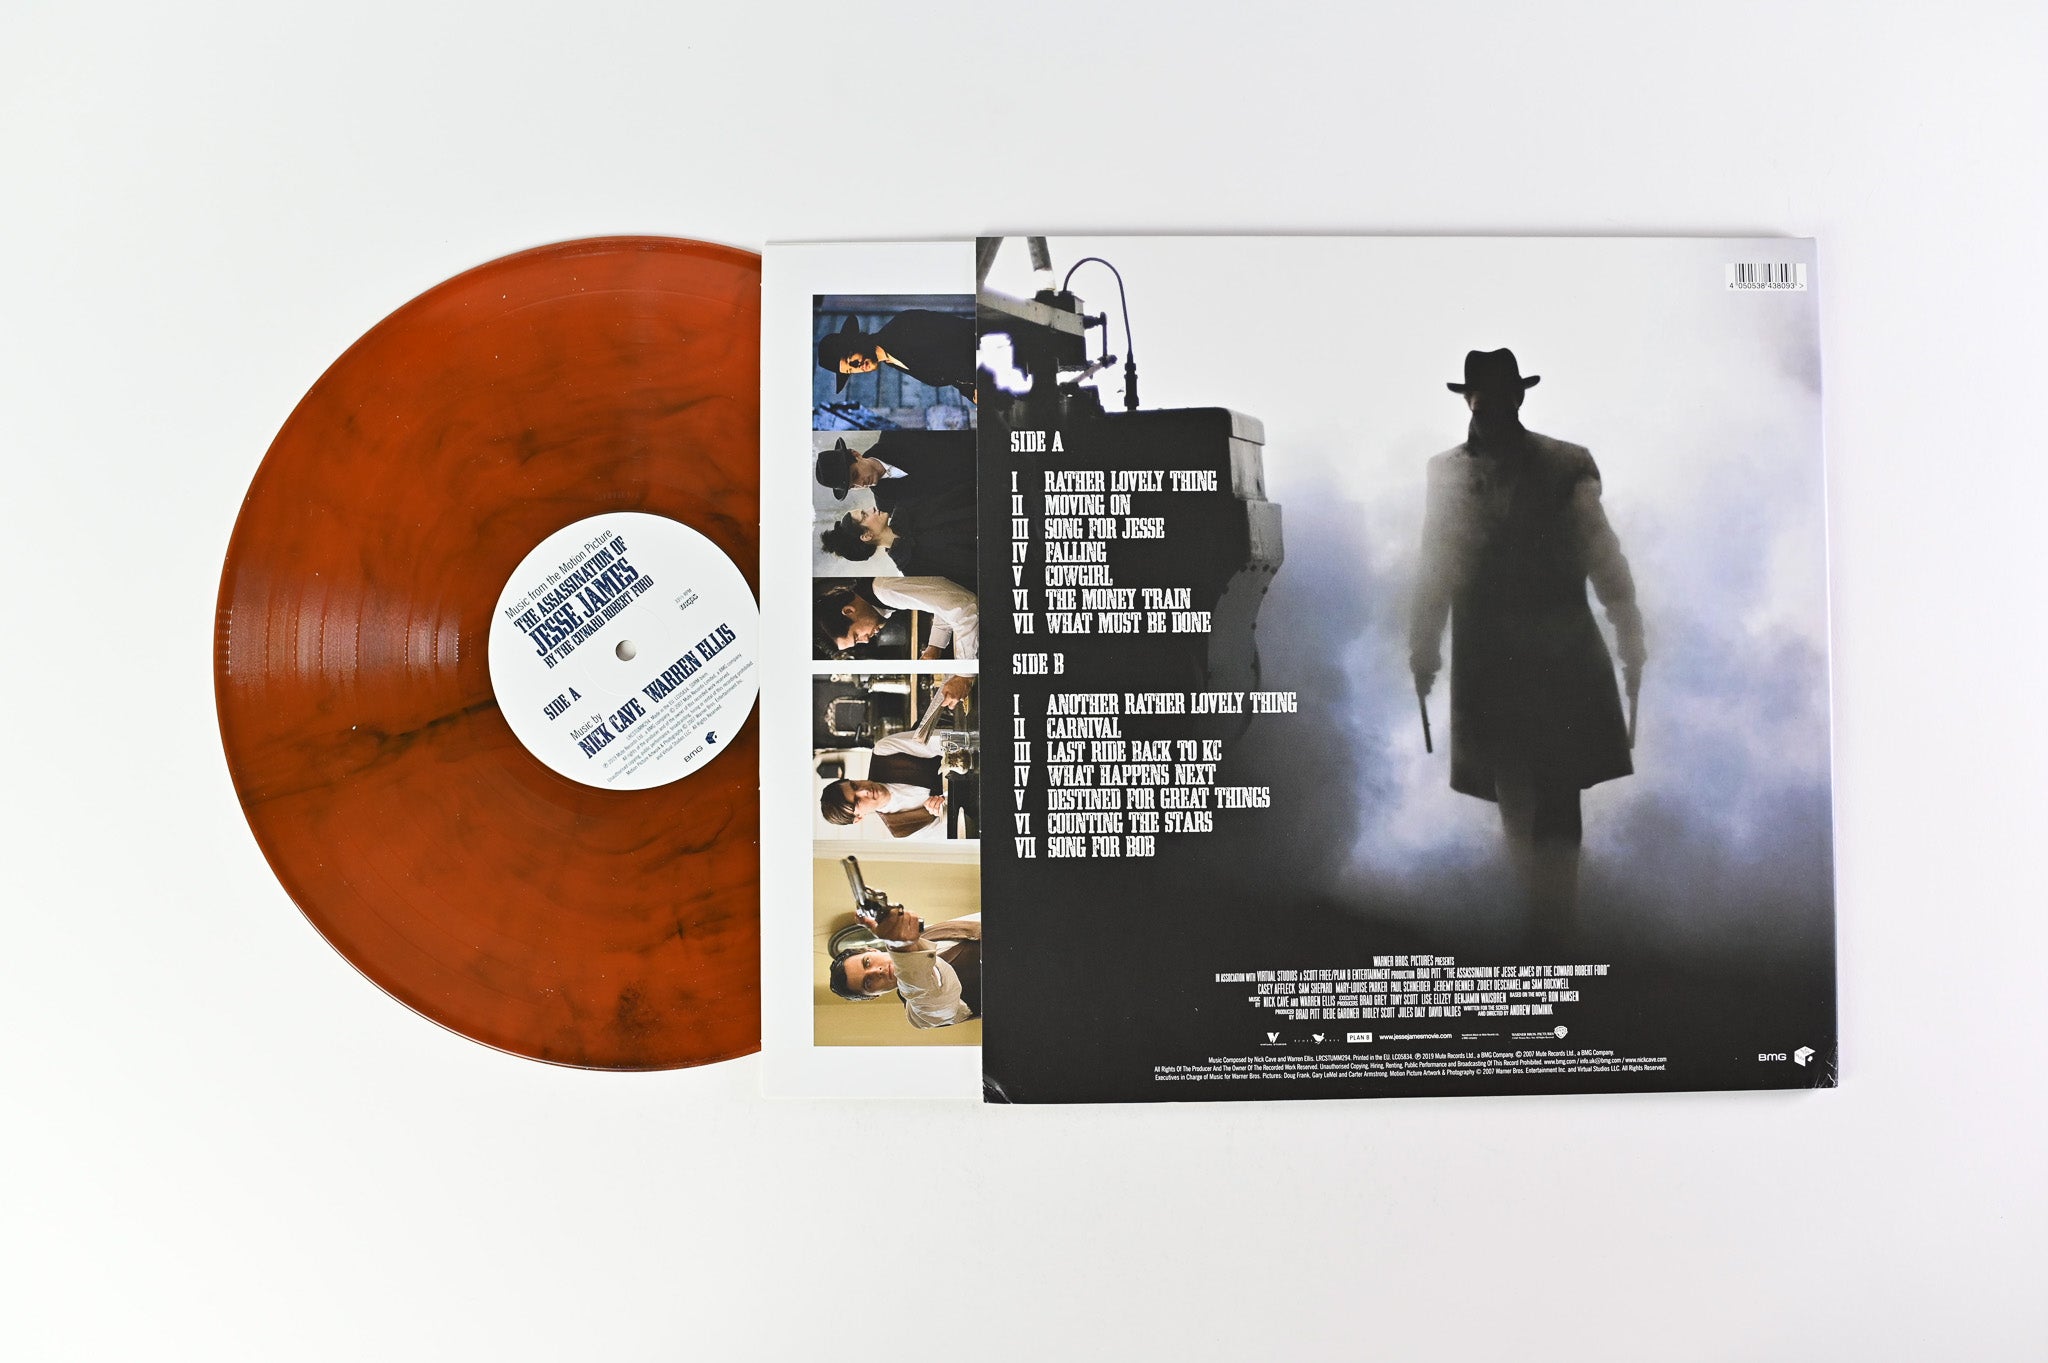 Nick Cave & Warren Ellis - The Assassination Of Jesse James By The Coward Robert Ford (Music From The Motion Picture) on Mute - Colored Vinyl